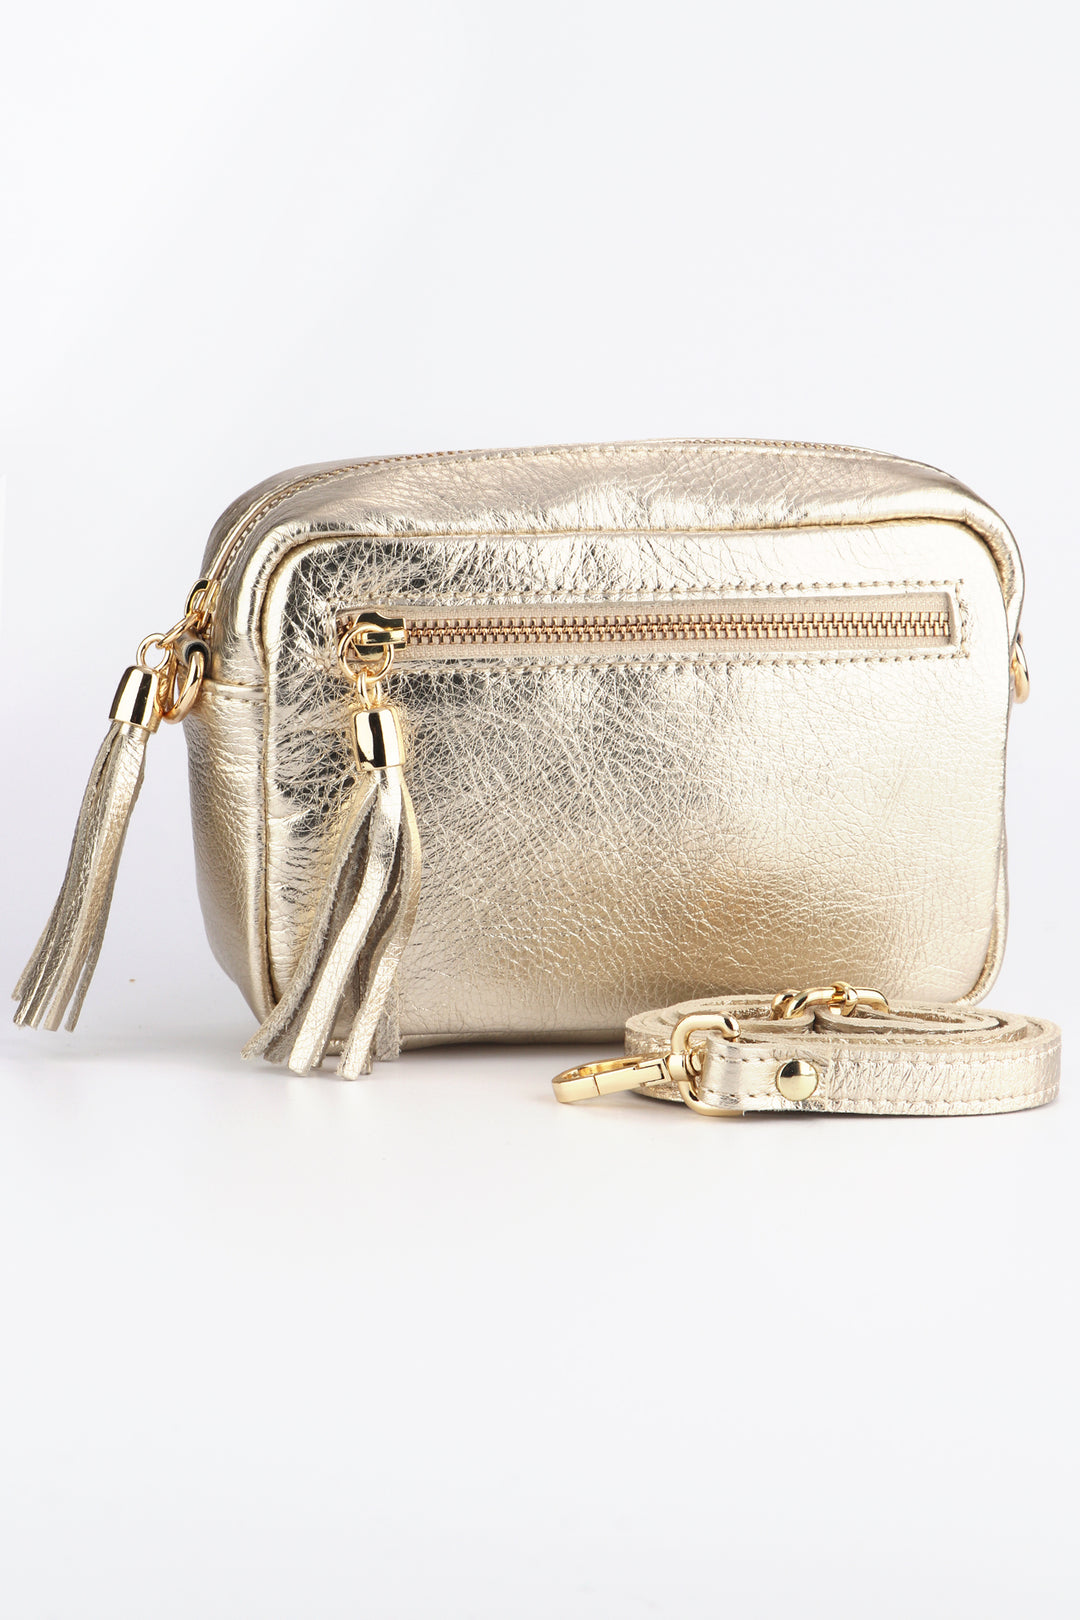 gold leather crossbody camera bag with a front zip pocket and matching detachable bag strap